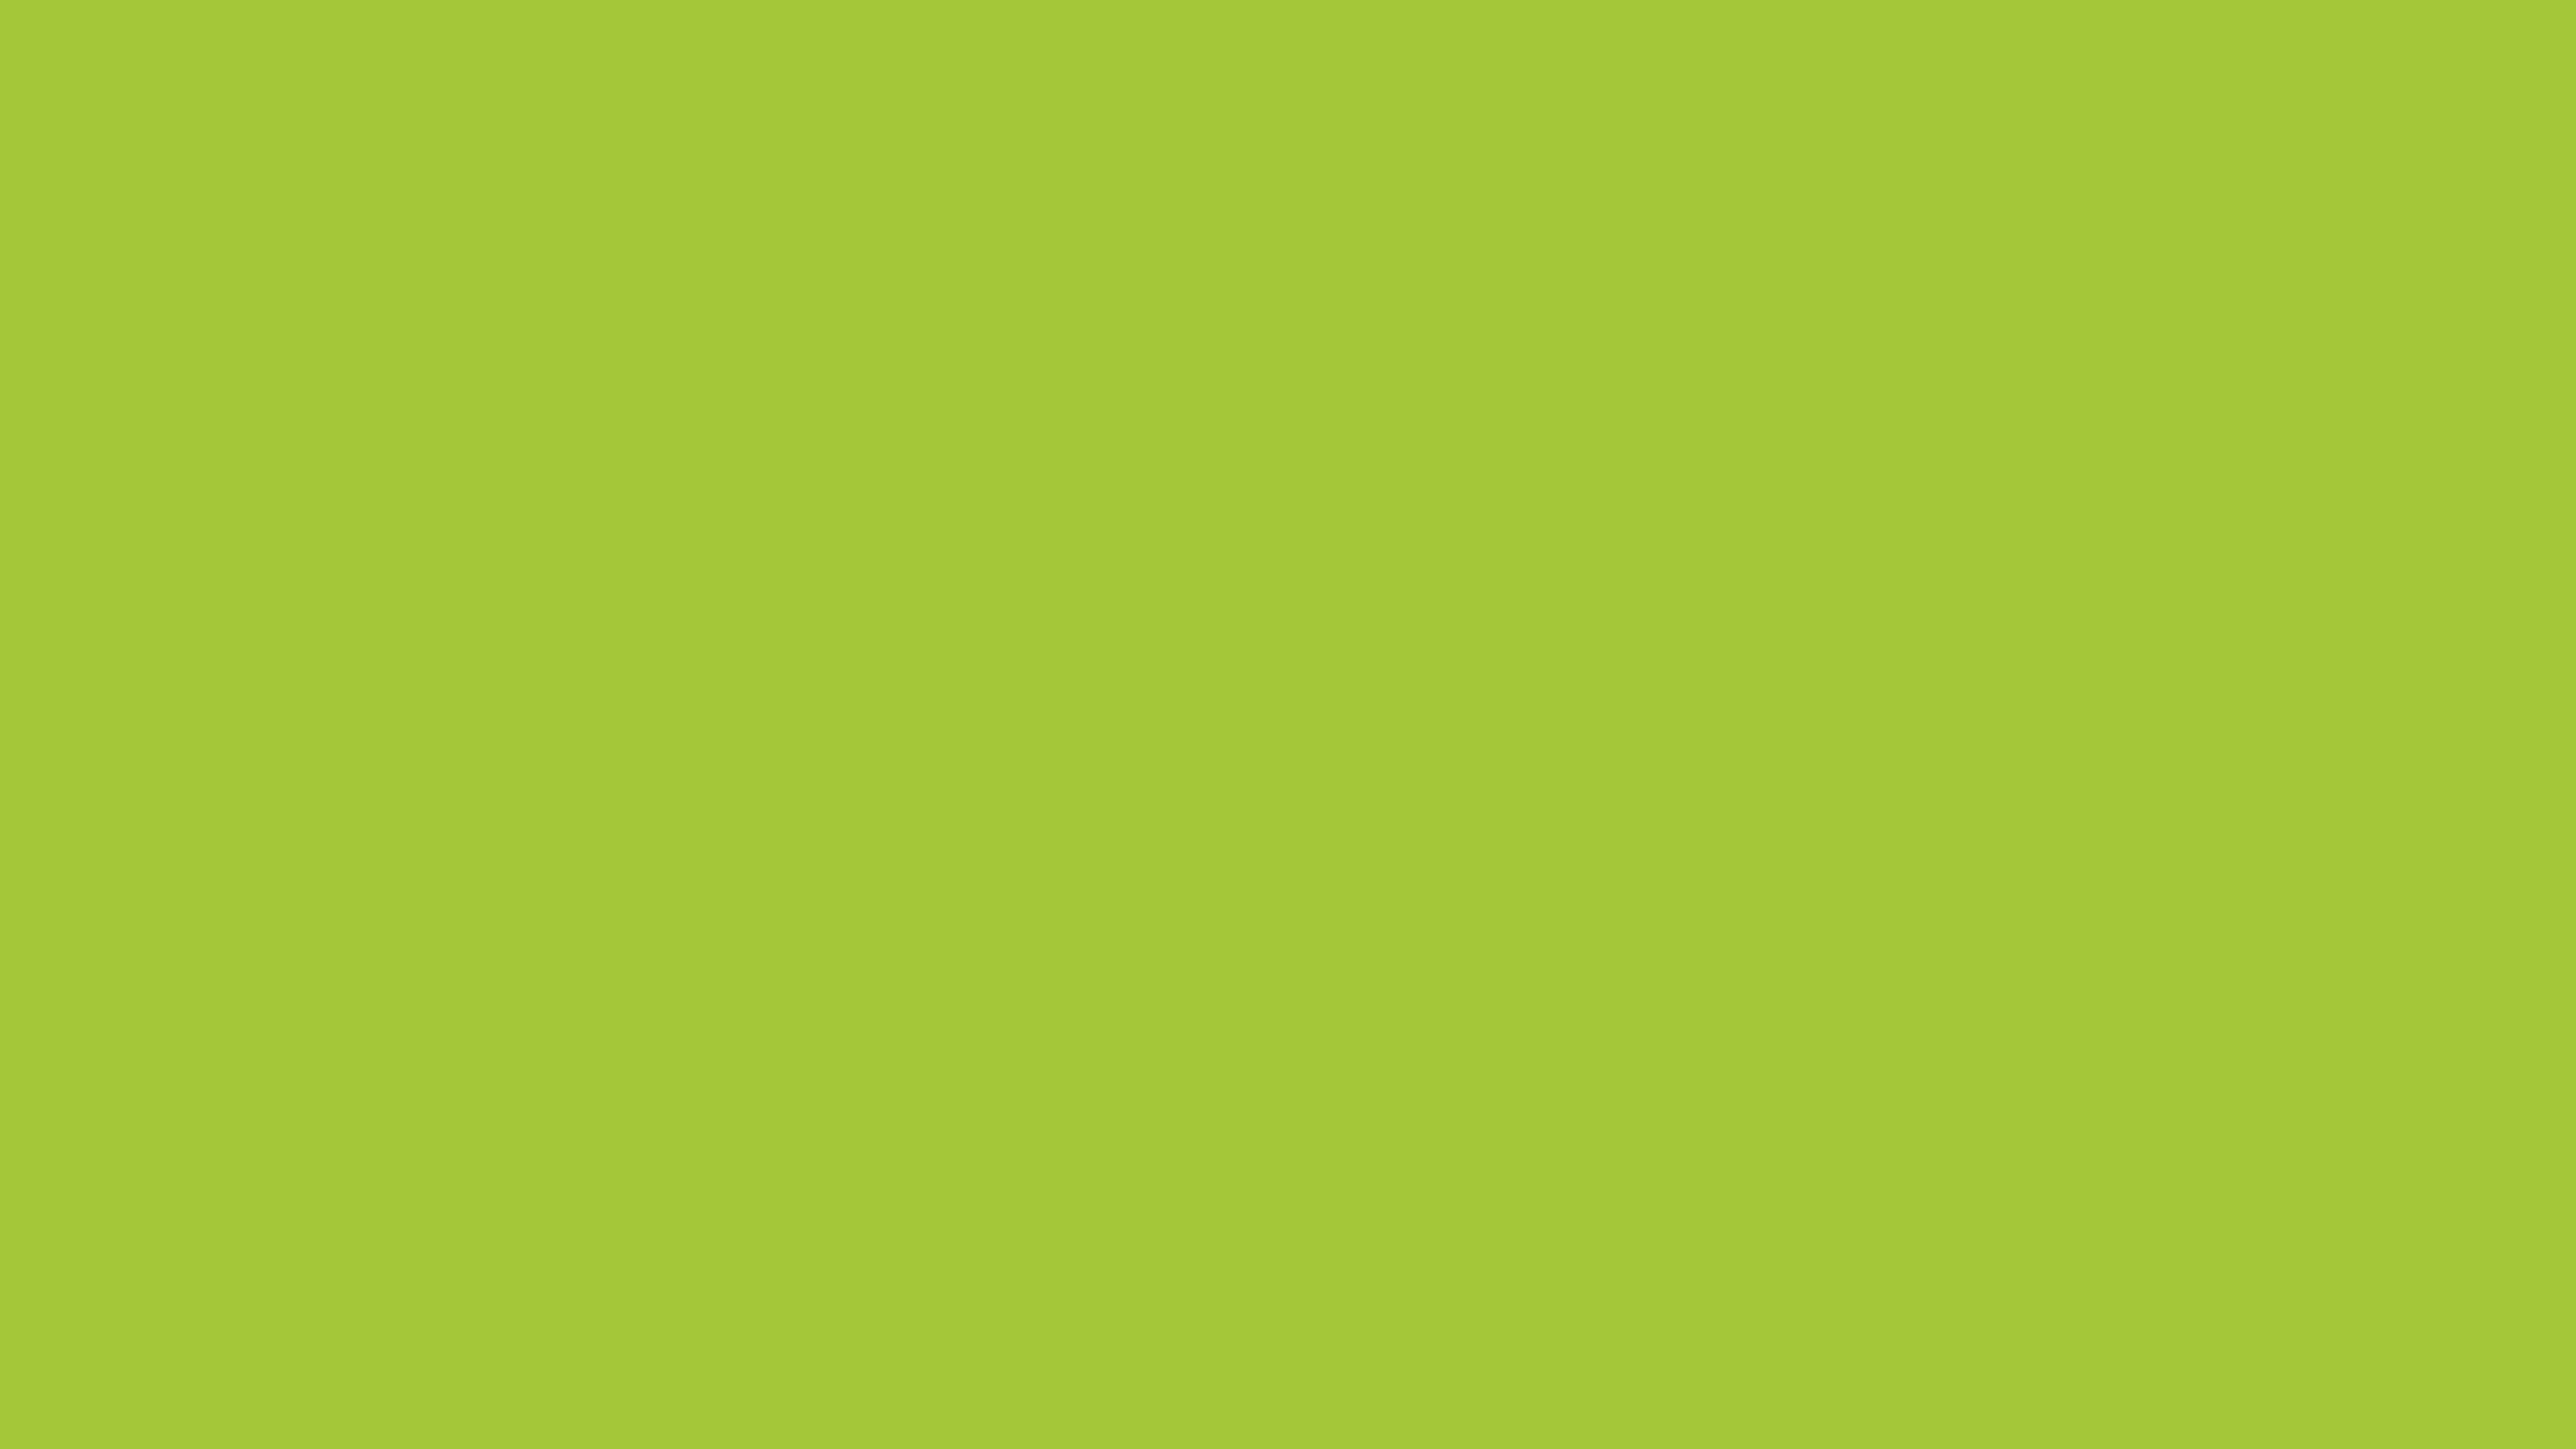 4096x2304 Android Green Solid Color Background